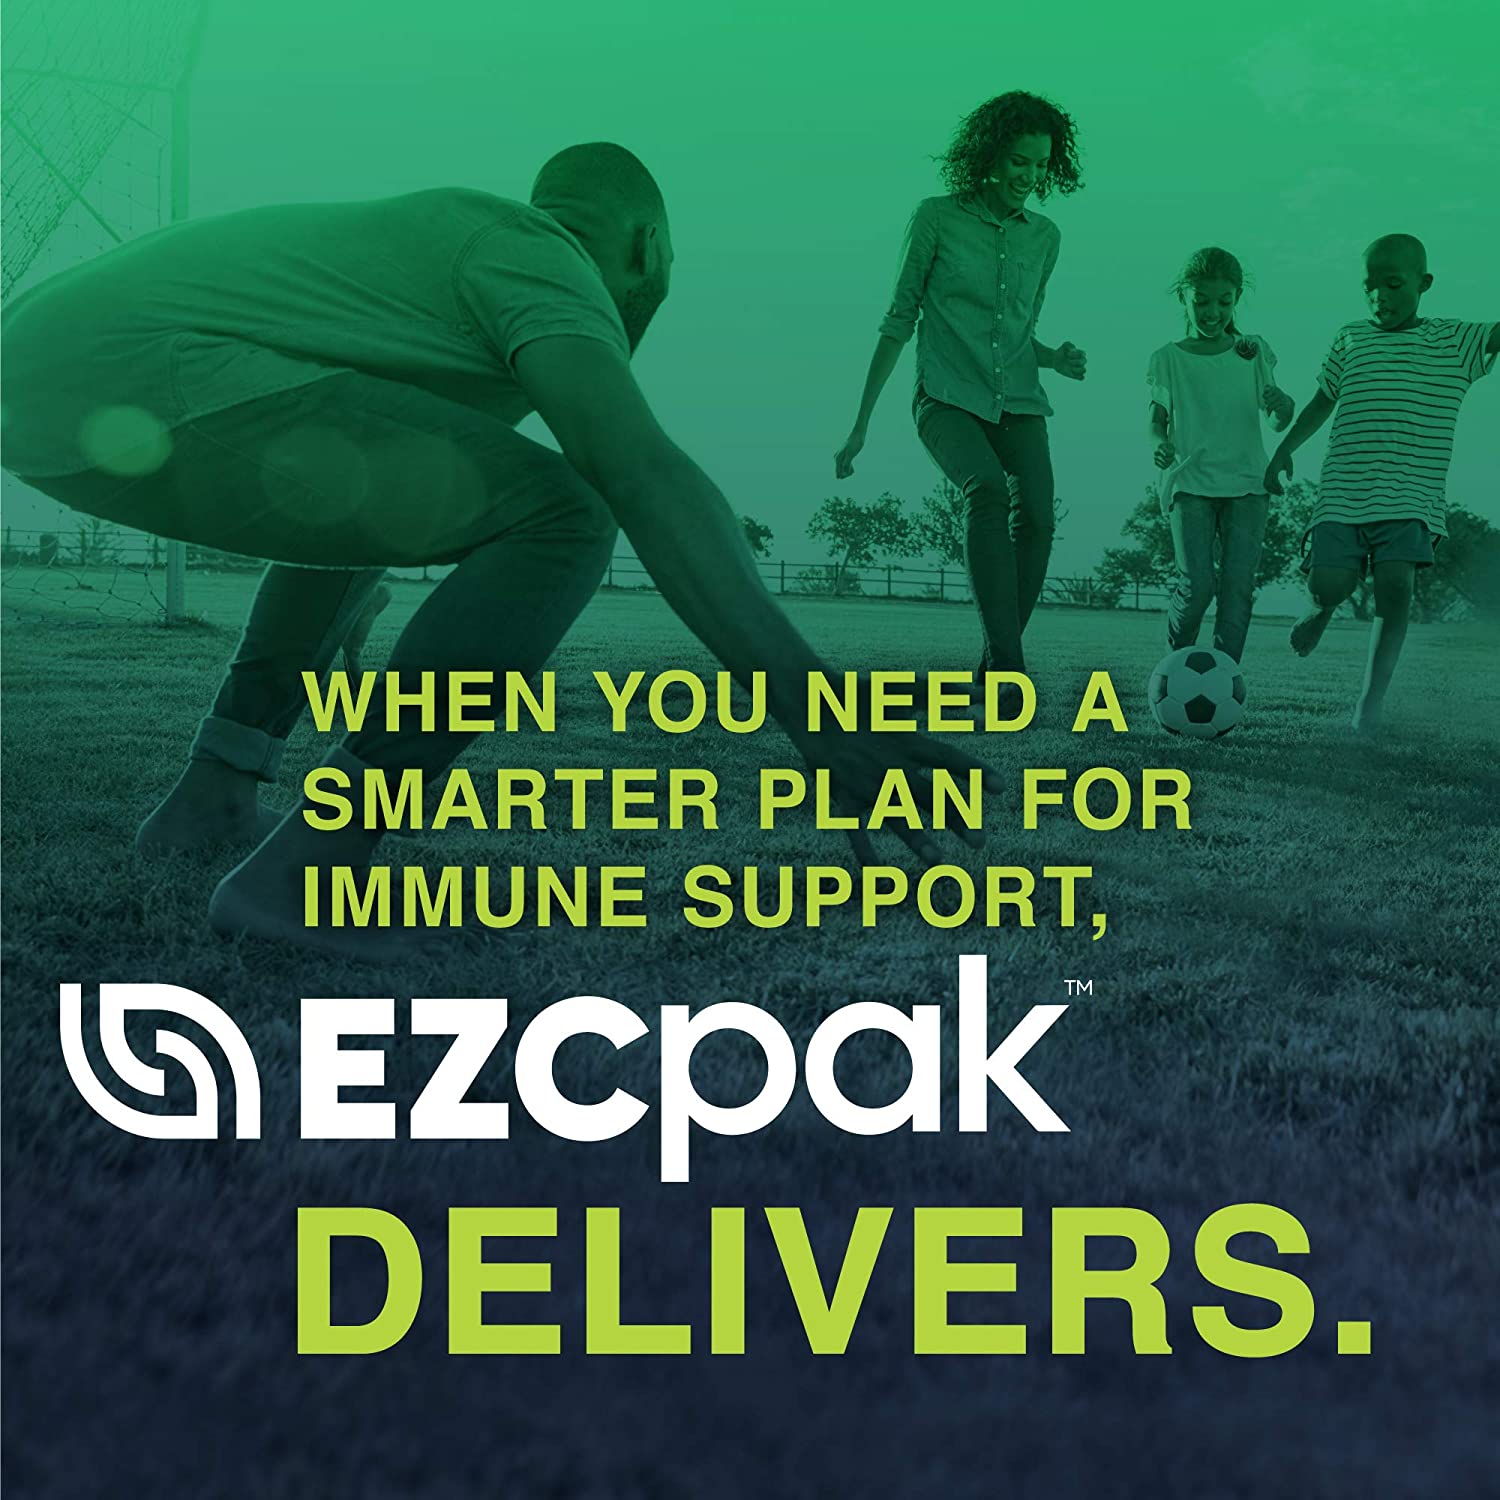 family playing soccer in background ezc pak delivers smarter plan for immune support